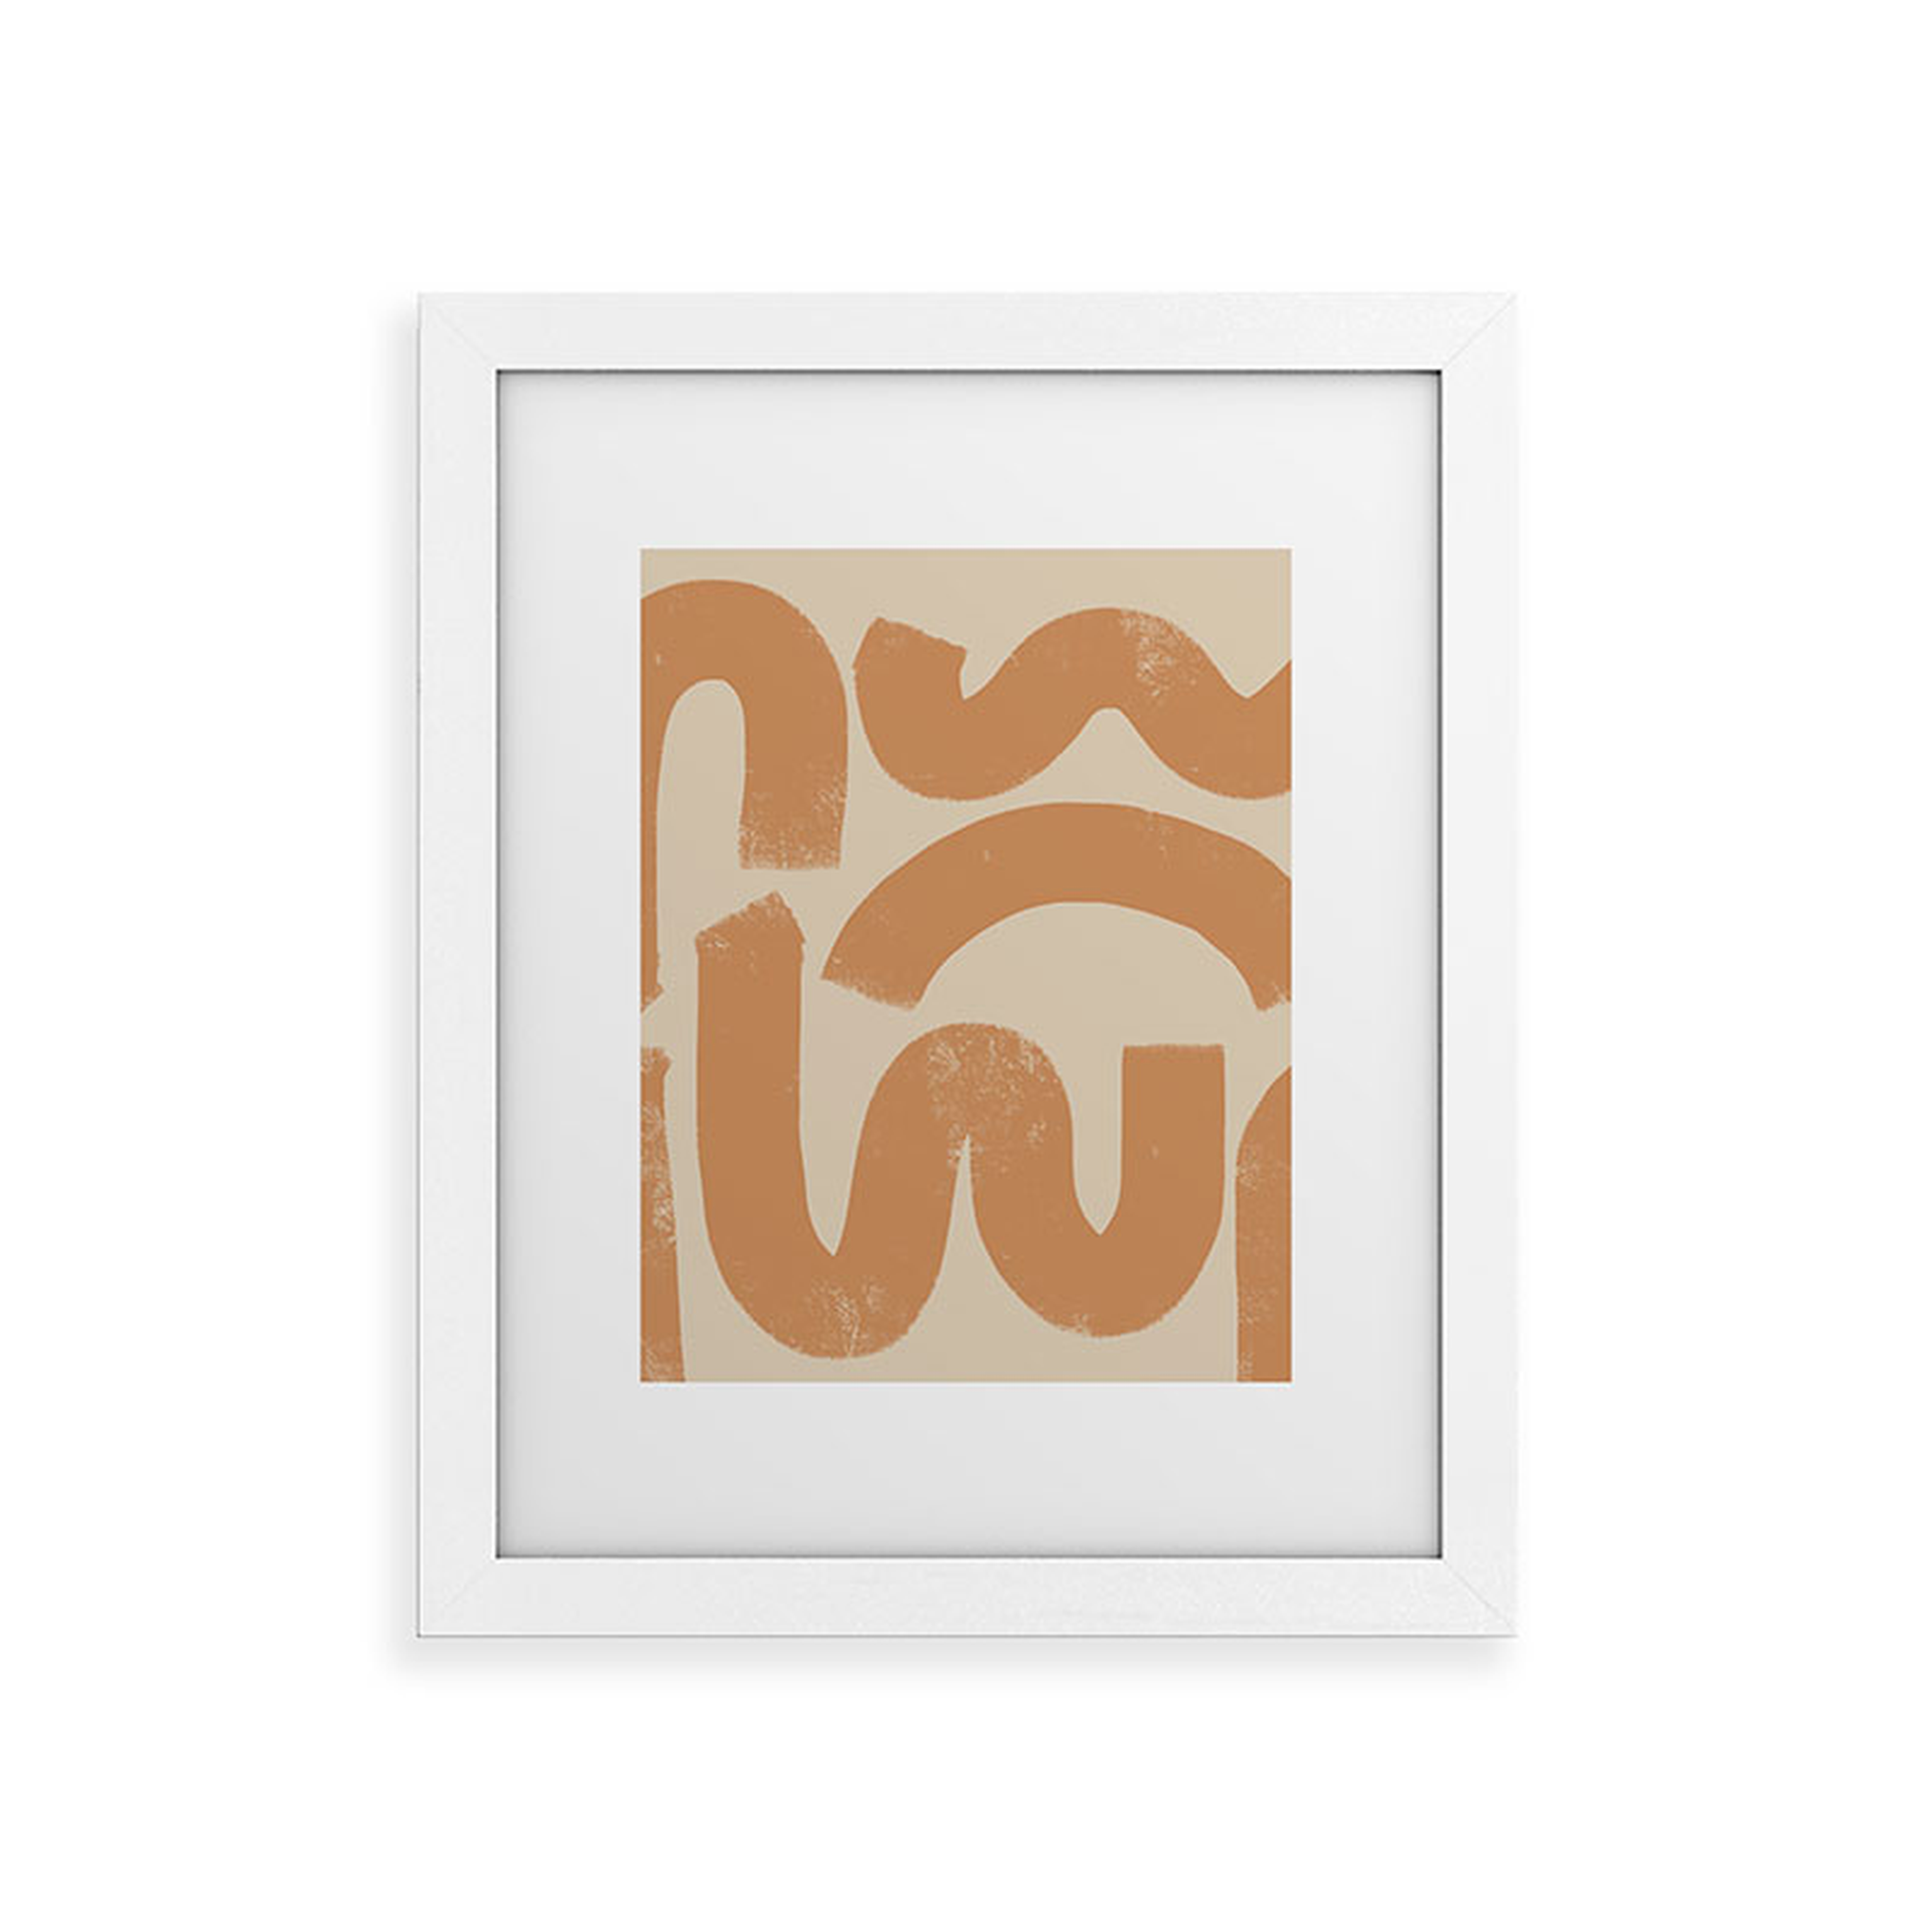 Squig by almostmakesperfect - Framed Art Print Classic White 11" x 14" - Wander Print Co.